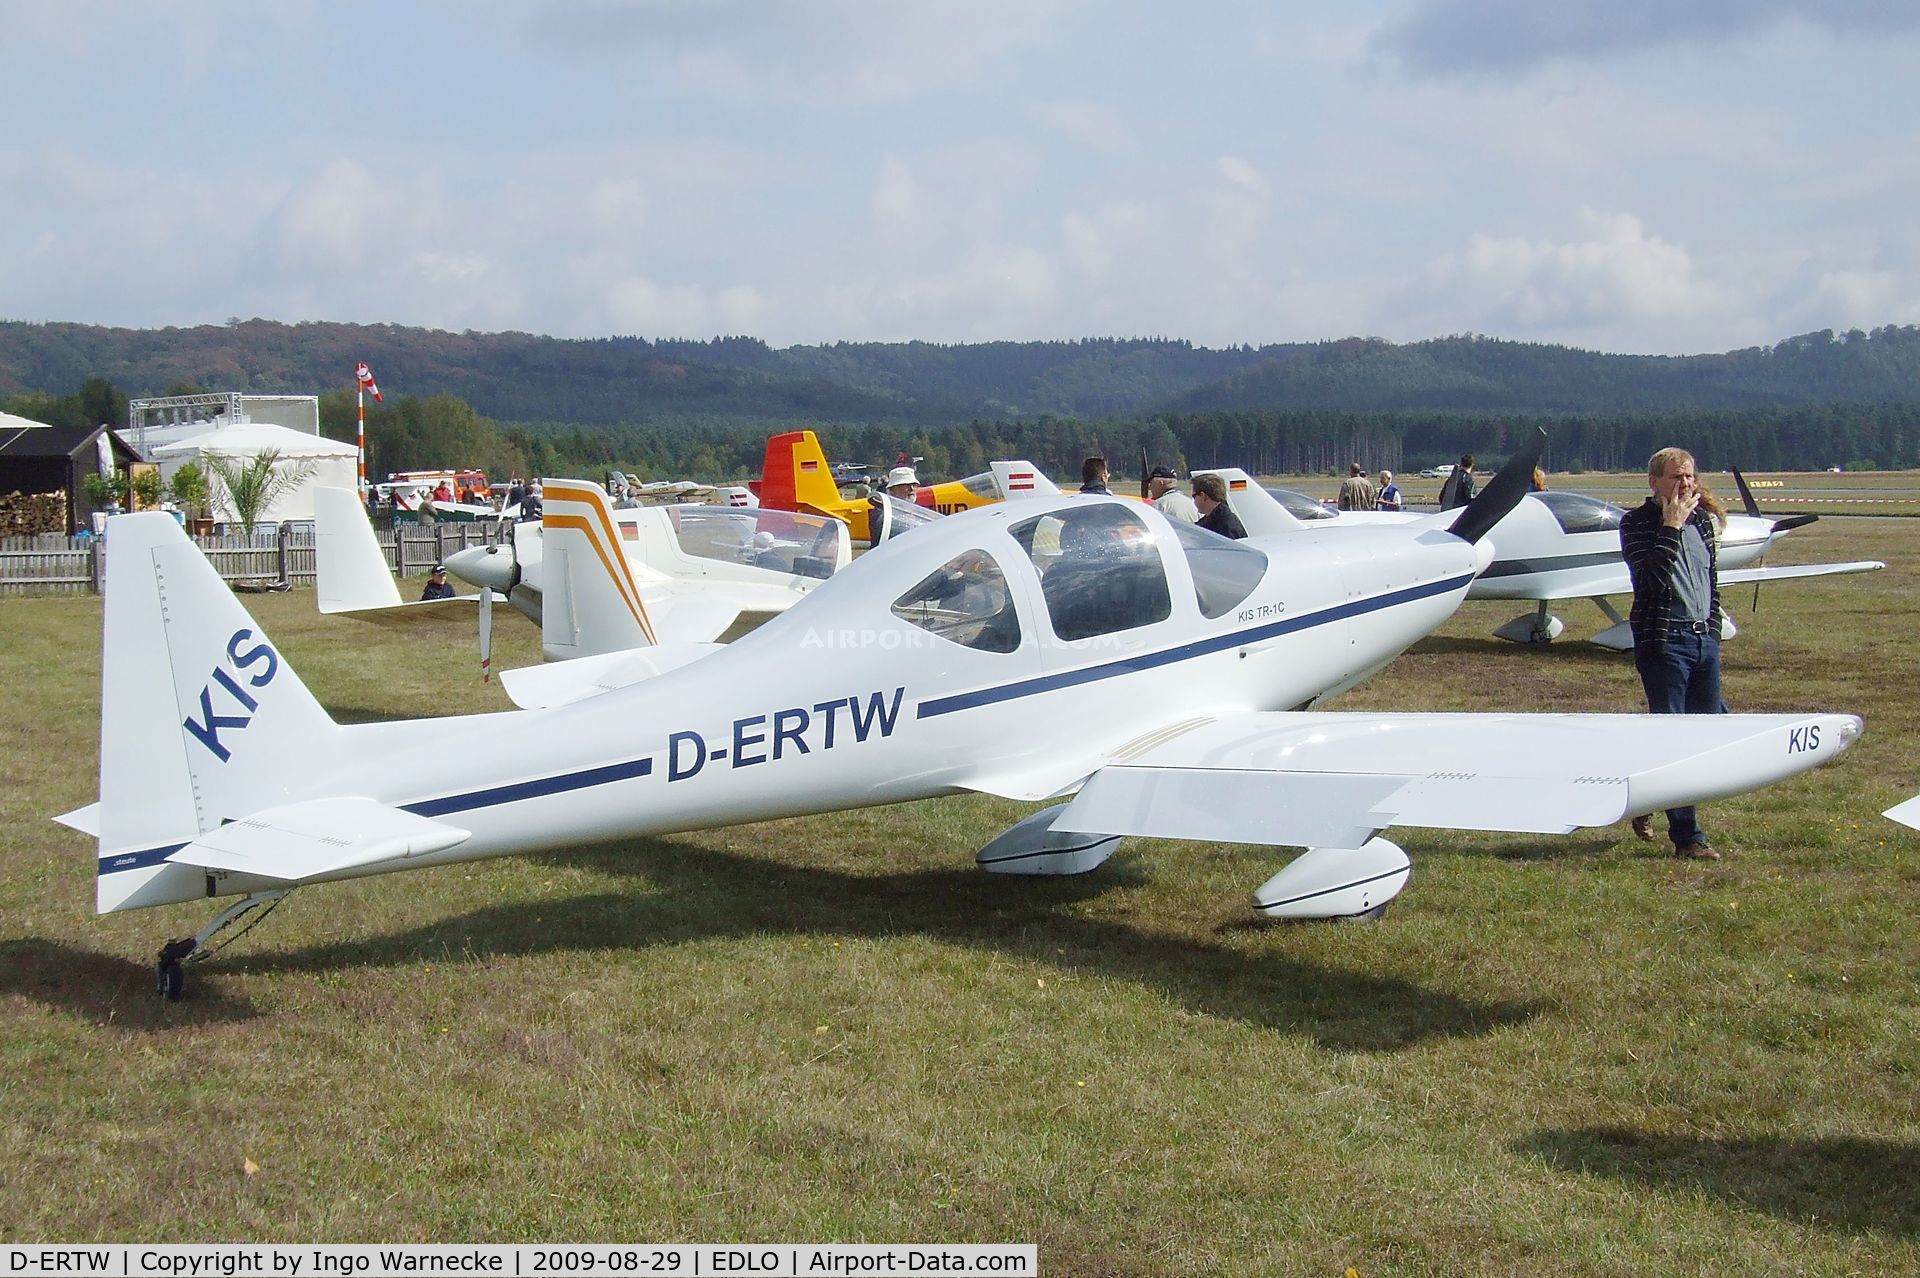 D-ERTW, Tri-R Kis TR-1 C/N 104, KIS (Twellmann) TR-1C at the 2009 OUV-Meeting at Oerlinghausen airfield